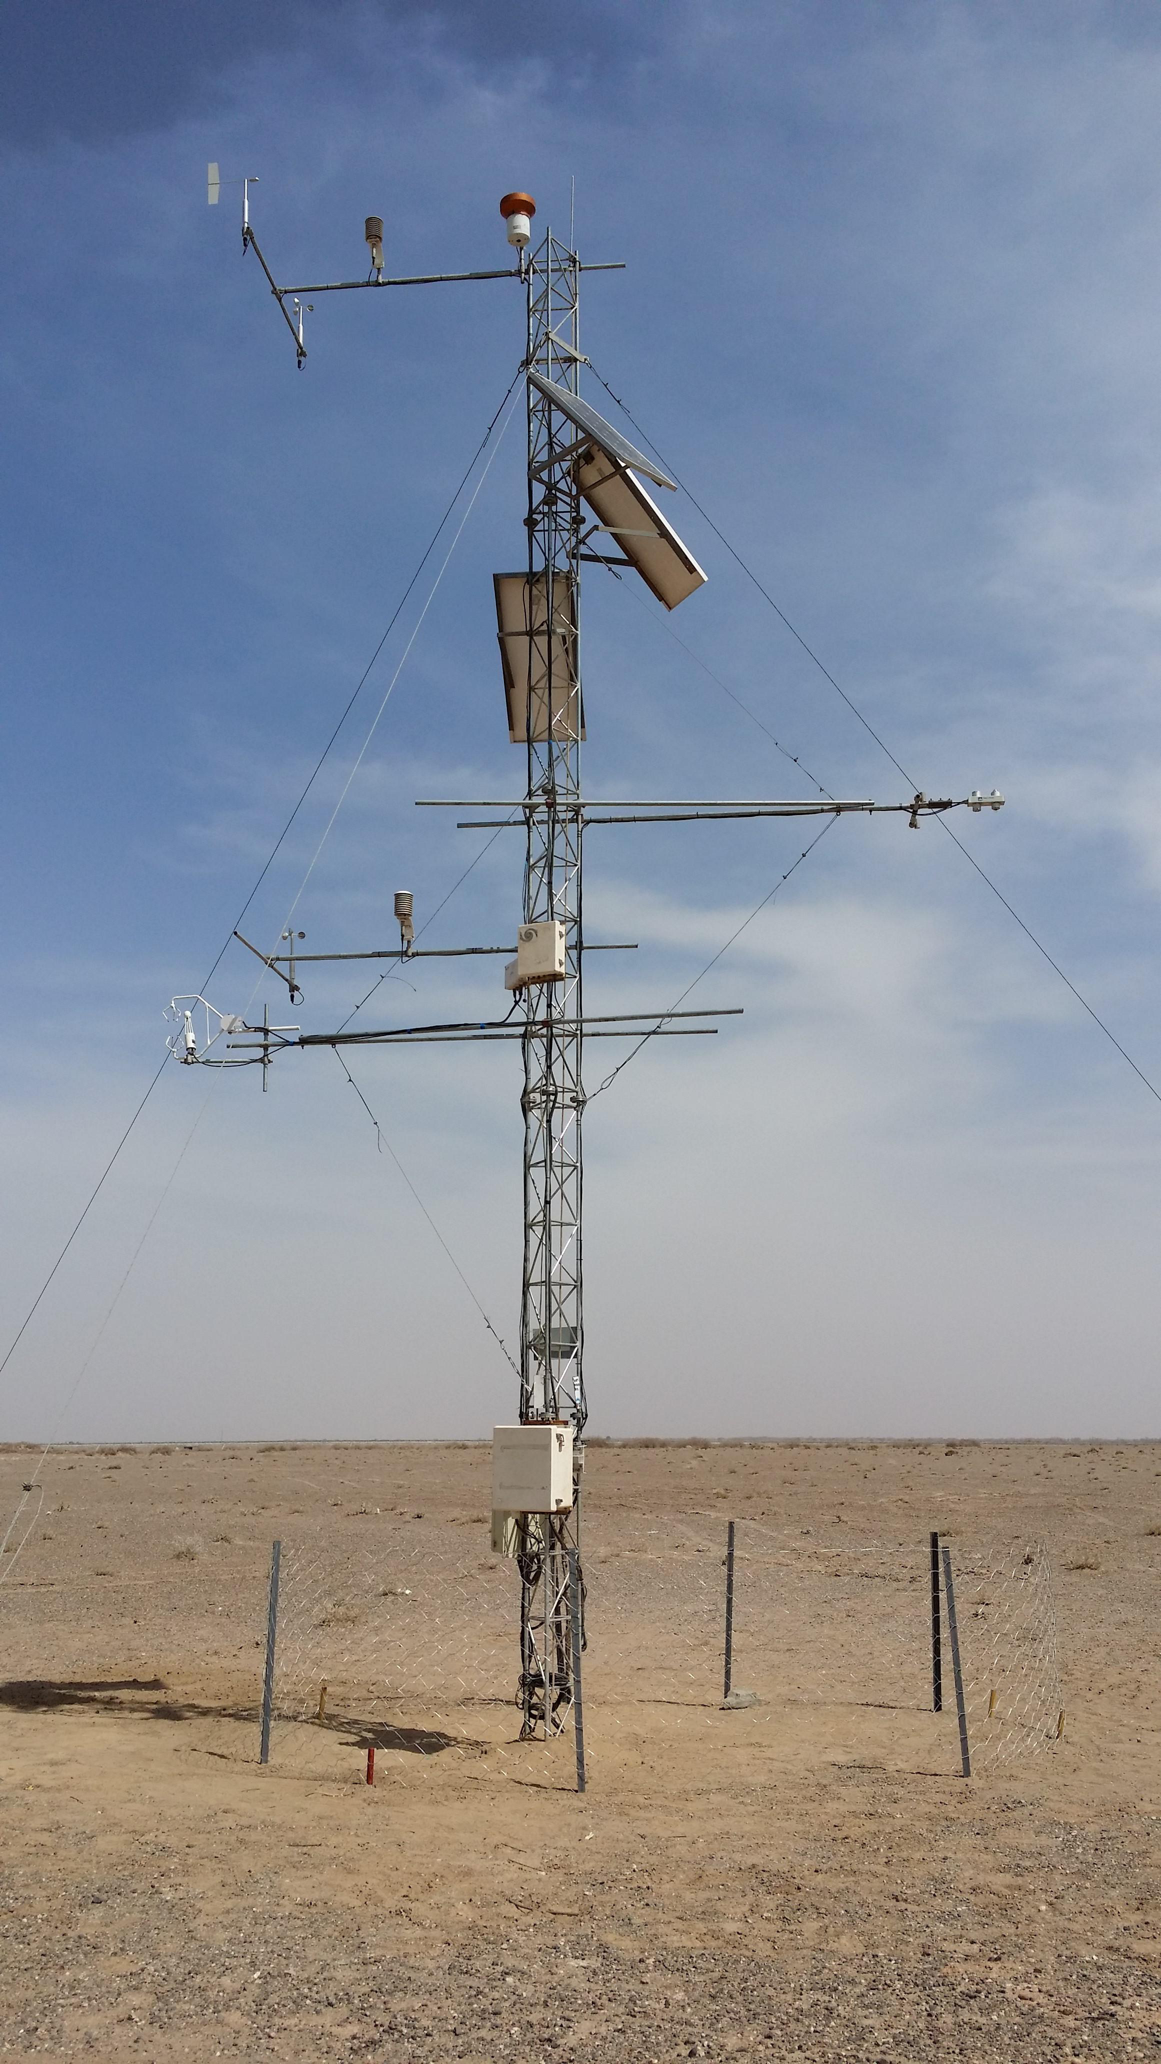 Qilian Mountains integrated observatory network: Dataset of Heihe integrated observatory network (automatic weather station of desert station, 2019)